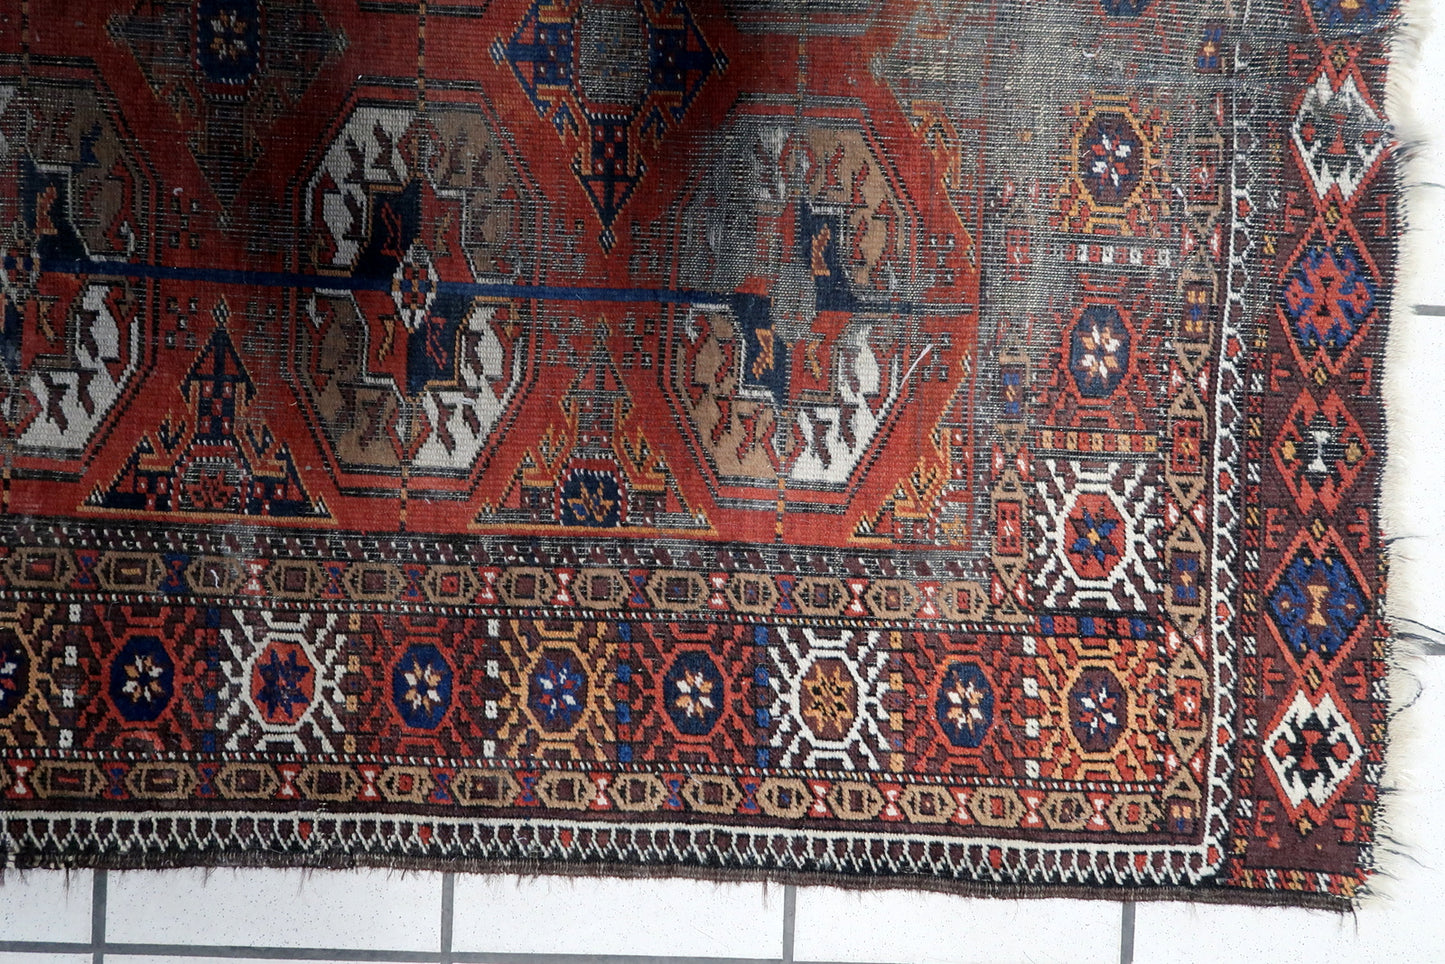 Close-up of Intricate Patterns on Vintage Afghan Baluch Rug